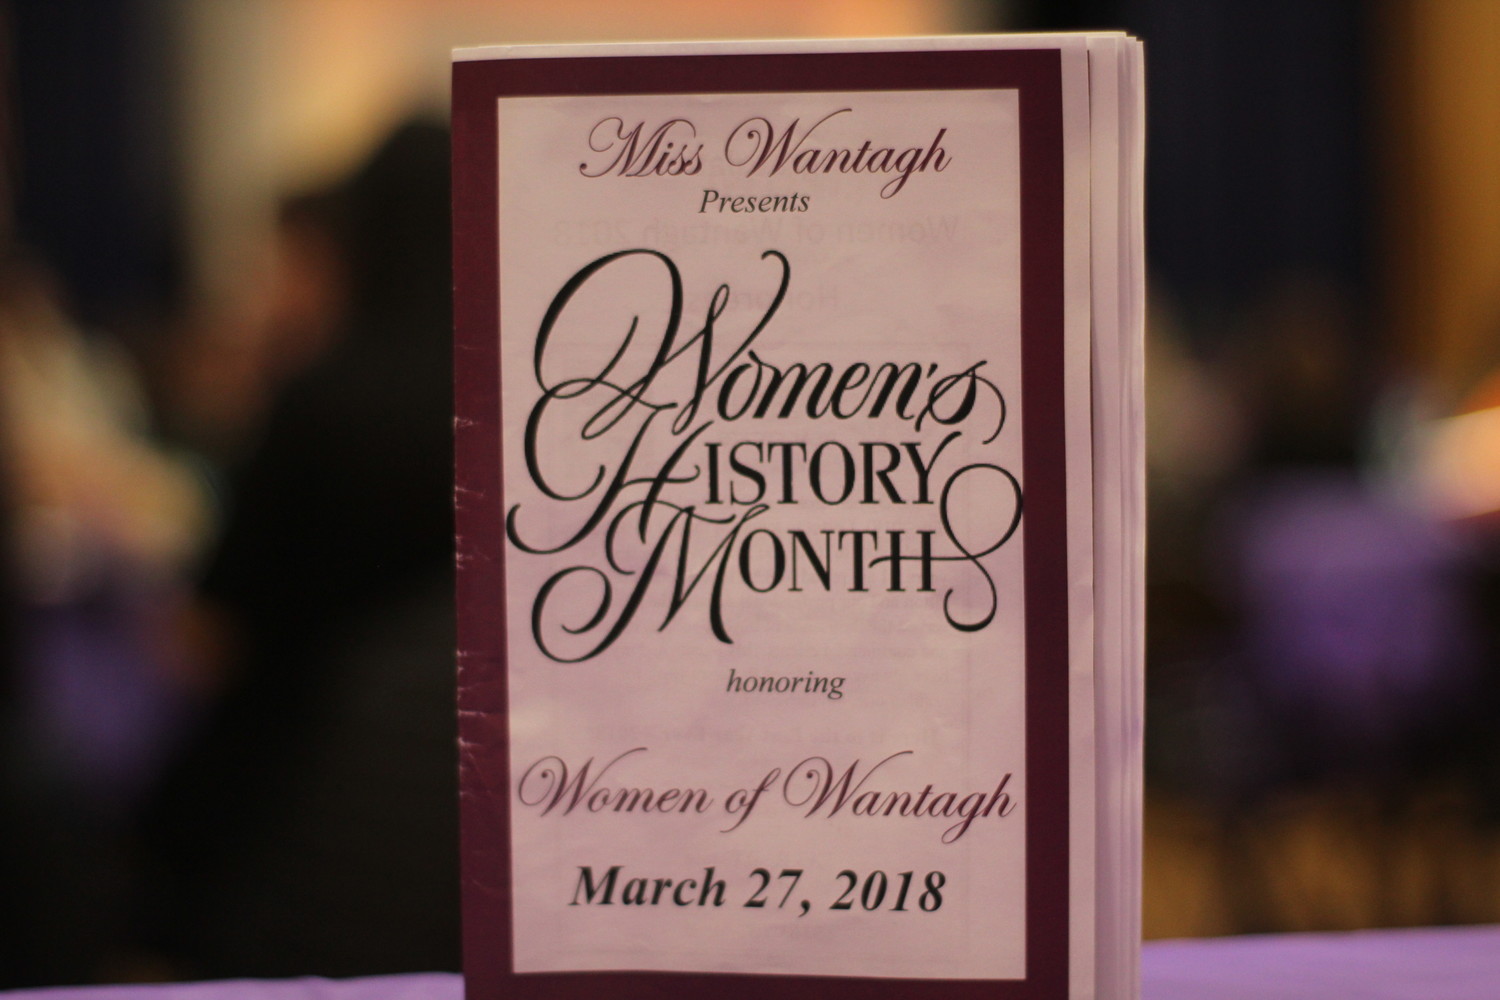 This year’s Women of Wantagh ceremony took place on March 27 at the Wantagh Elementary School gymnasium. The Miss Wantagh court mothers helped coordinator Ella Stevens set the event up through dessert baking and decorating the event space.